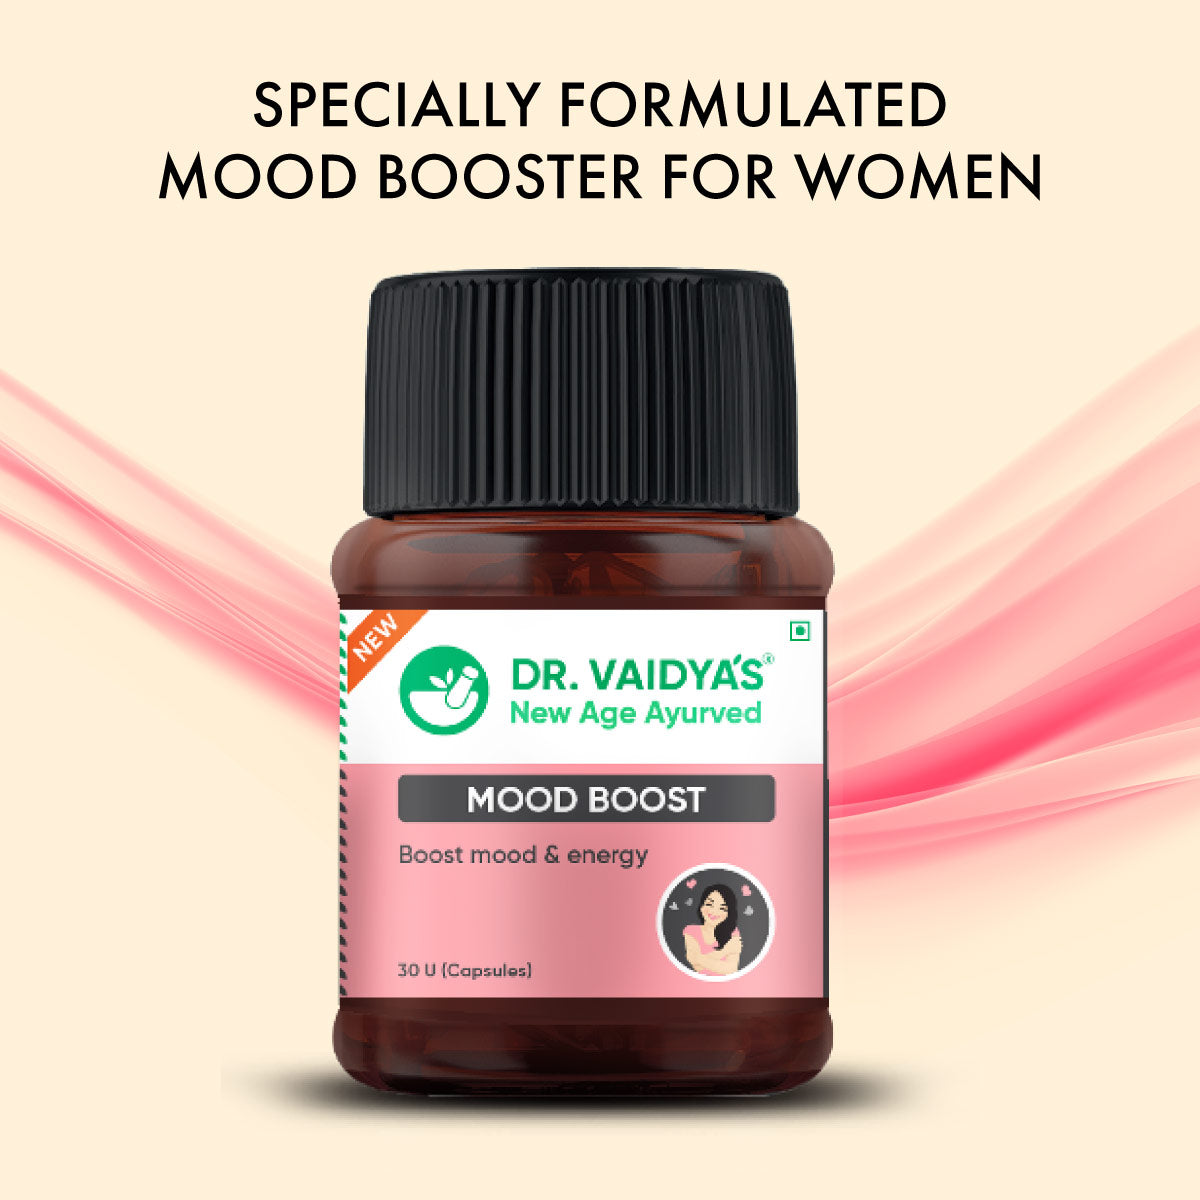 Mood Boost: To Improve Mood, Drive & Energy In Women